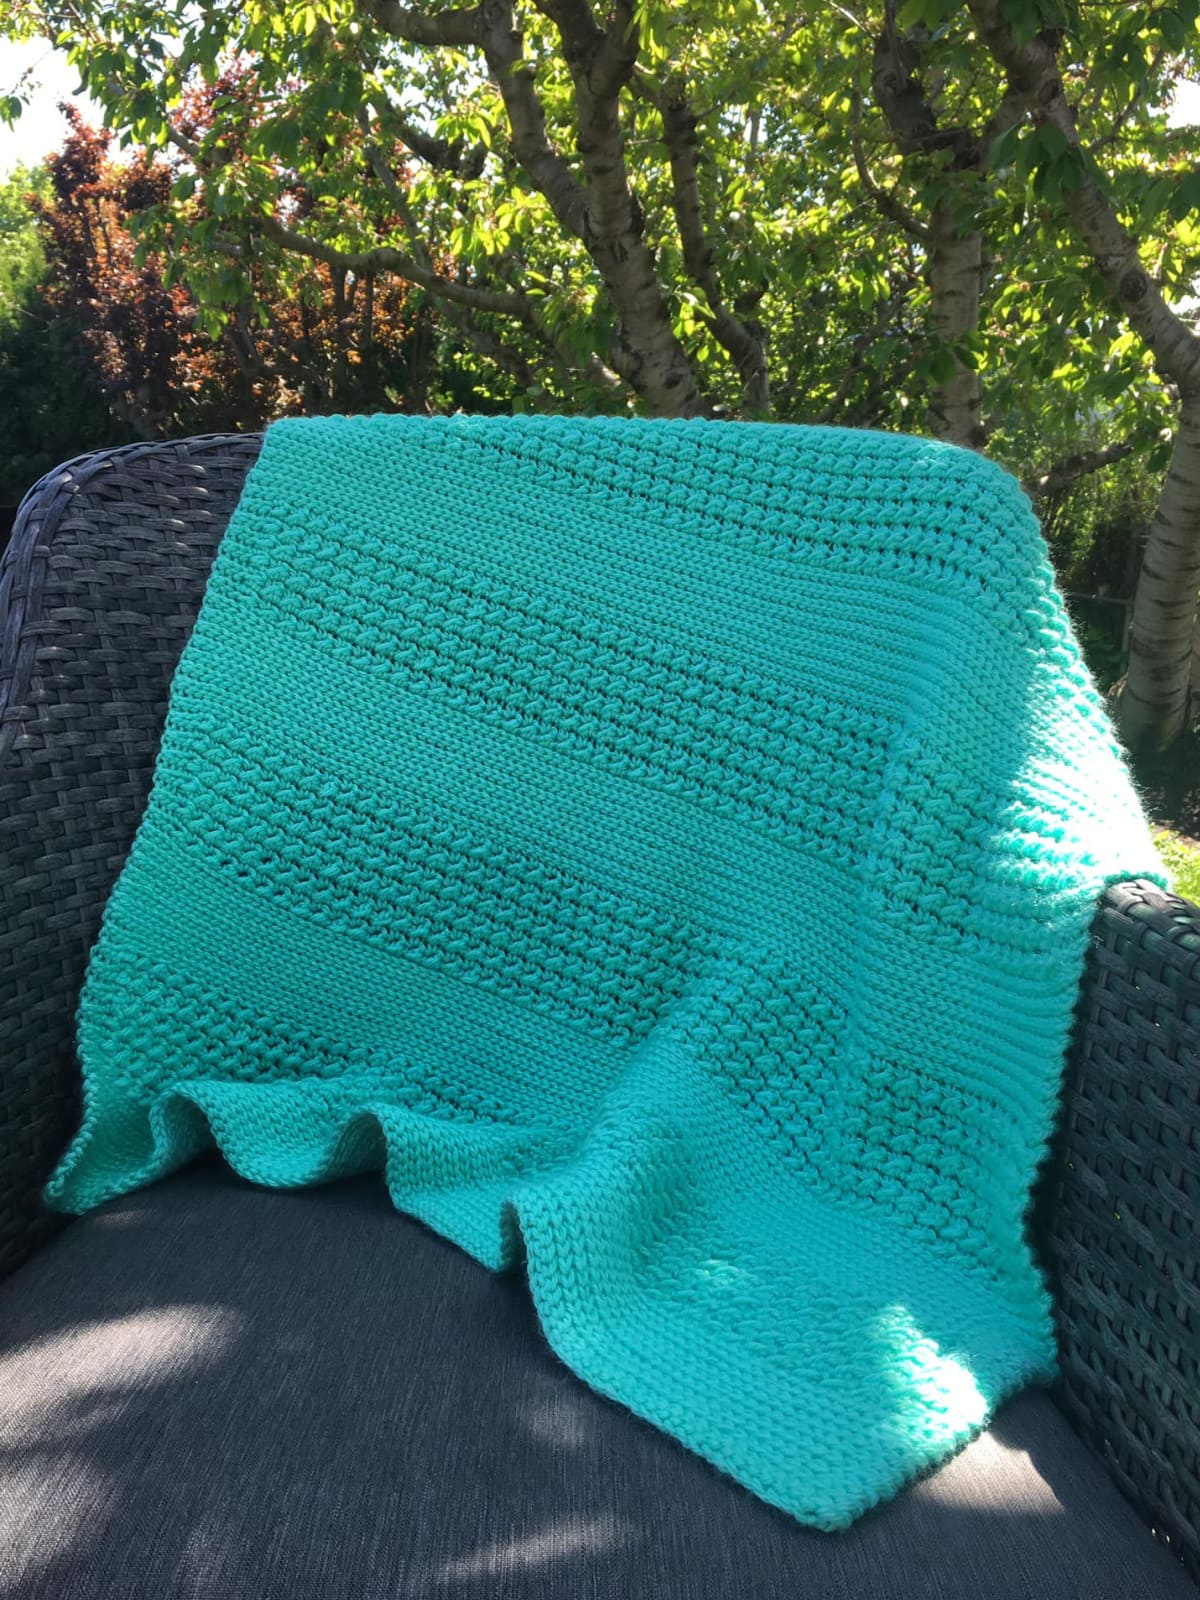 Crochet baby blanket in green draped over a dark chair sitting outside.